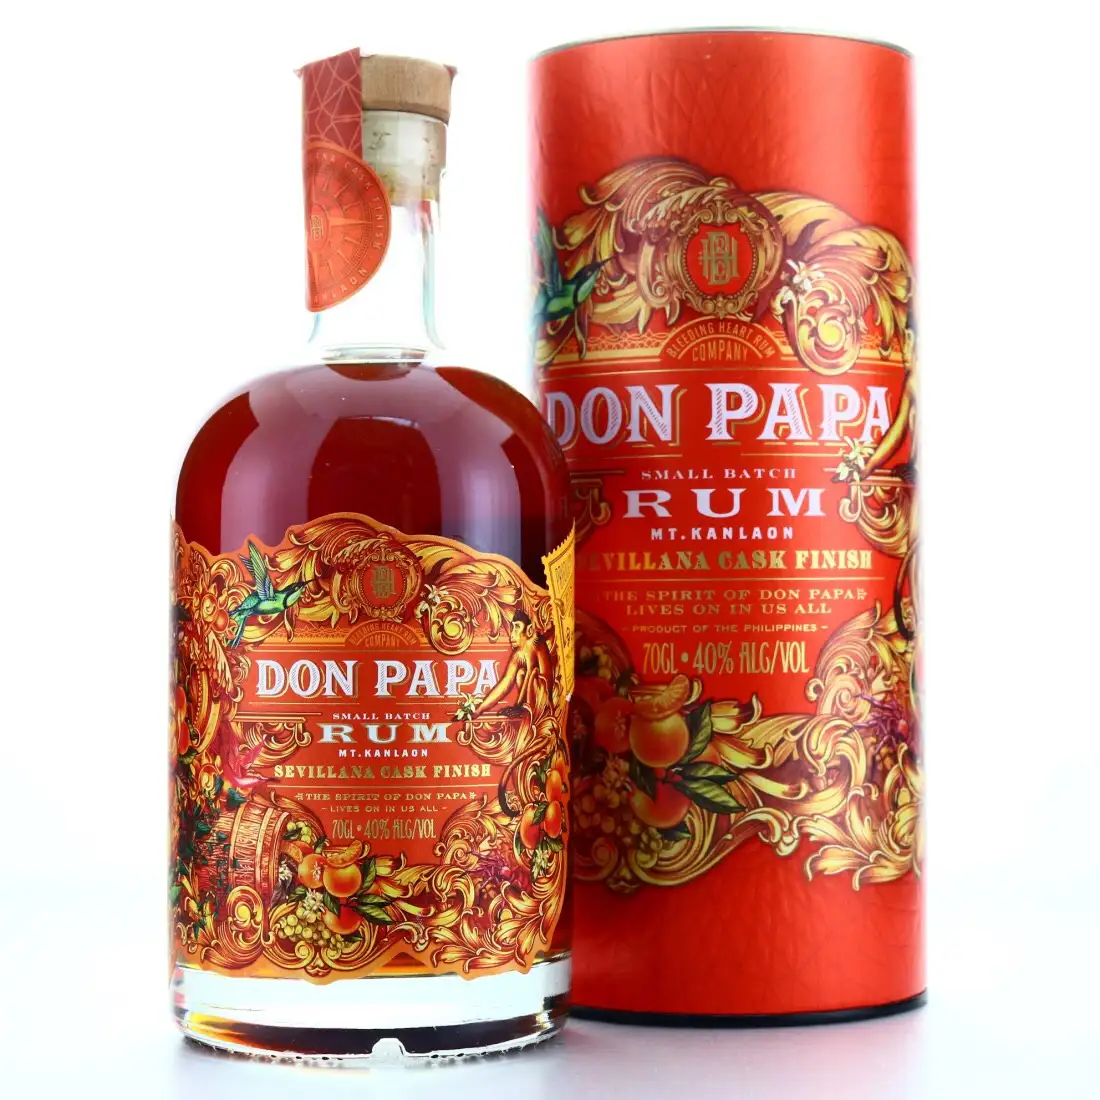 Image of the front of the bottle of the rum Don Papa Rum Sevillana Cask Finish